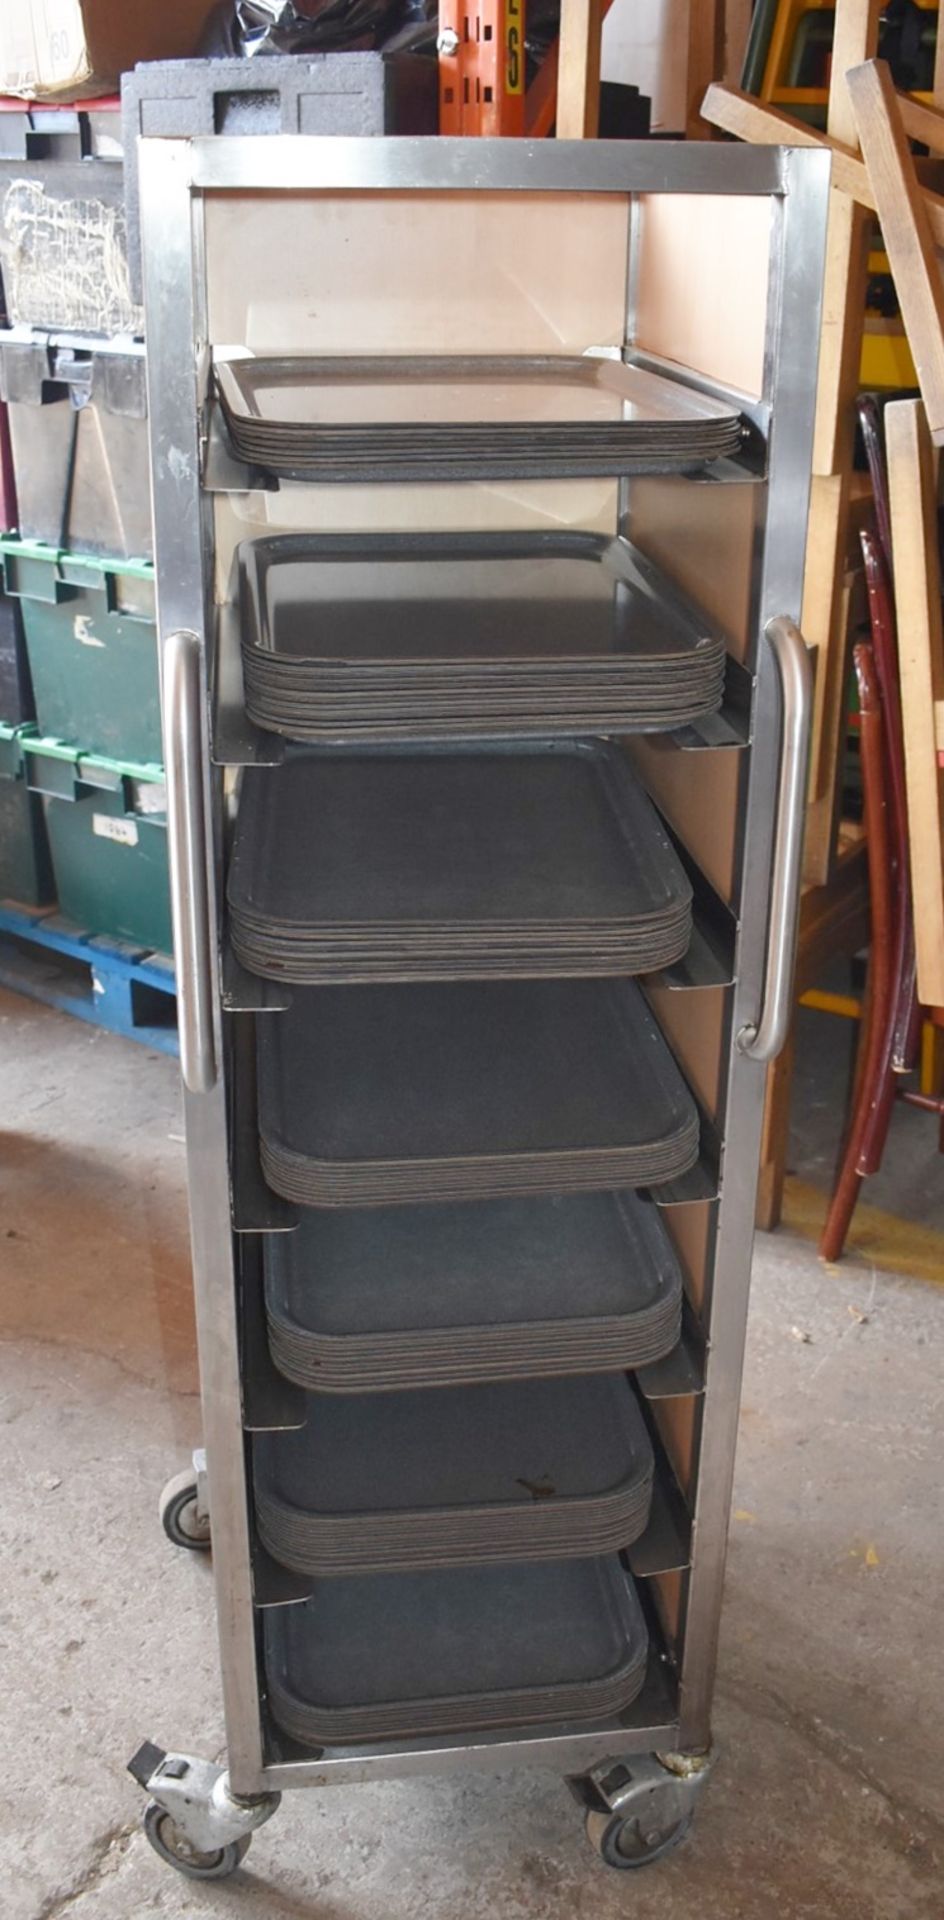 1 x Cafeteria Canteen Tray Stands With Approximately 80 x Food Trays - Recently Removed From Major S - Image 11 of 16